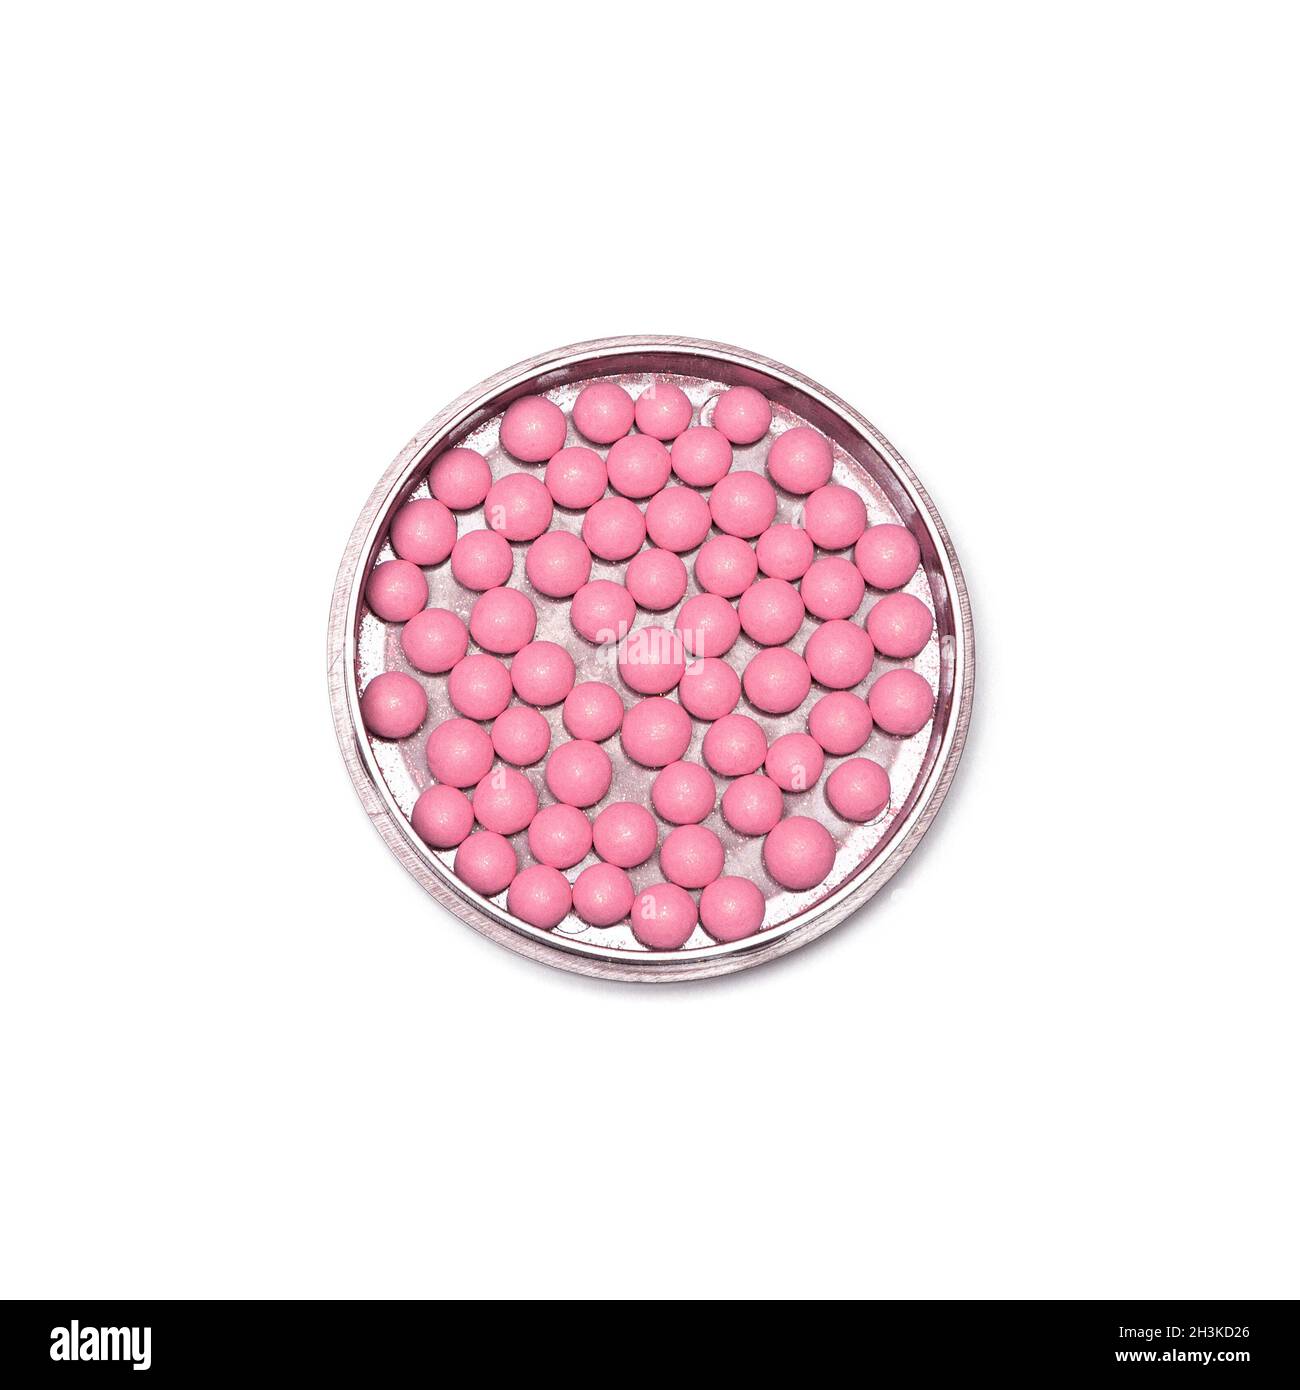 Jar of pink ball blusher isolated on white background, close-up Stock Photo